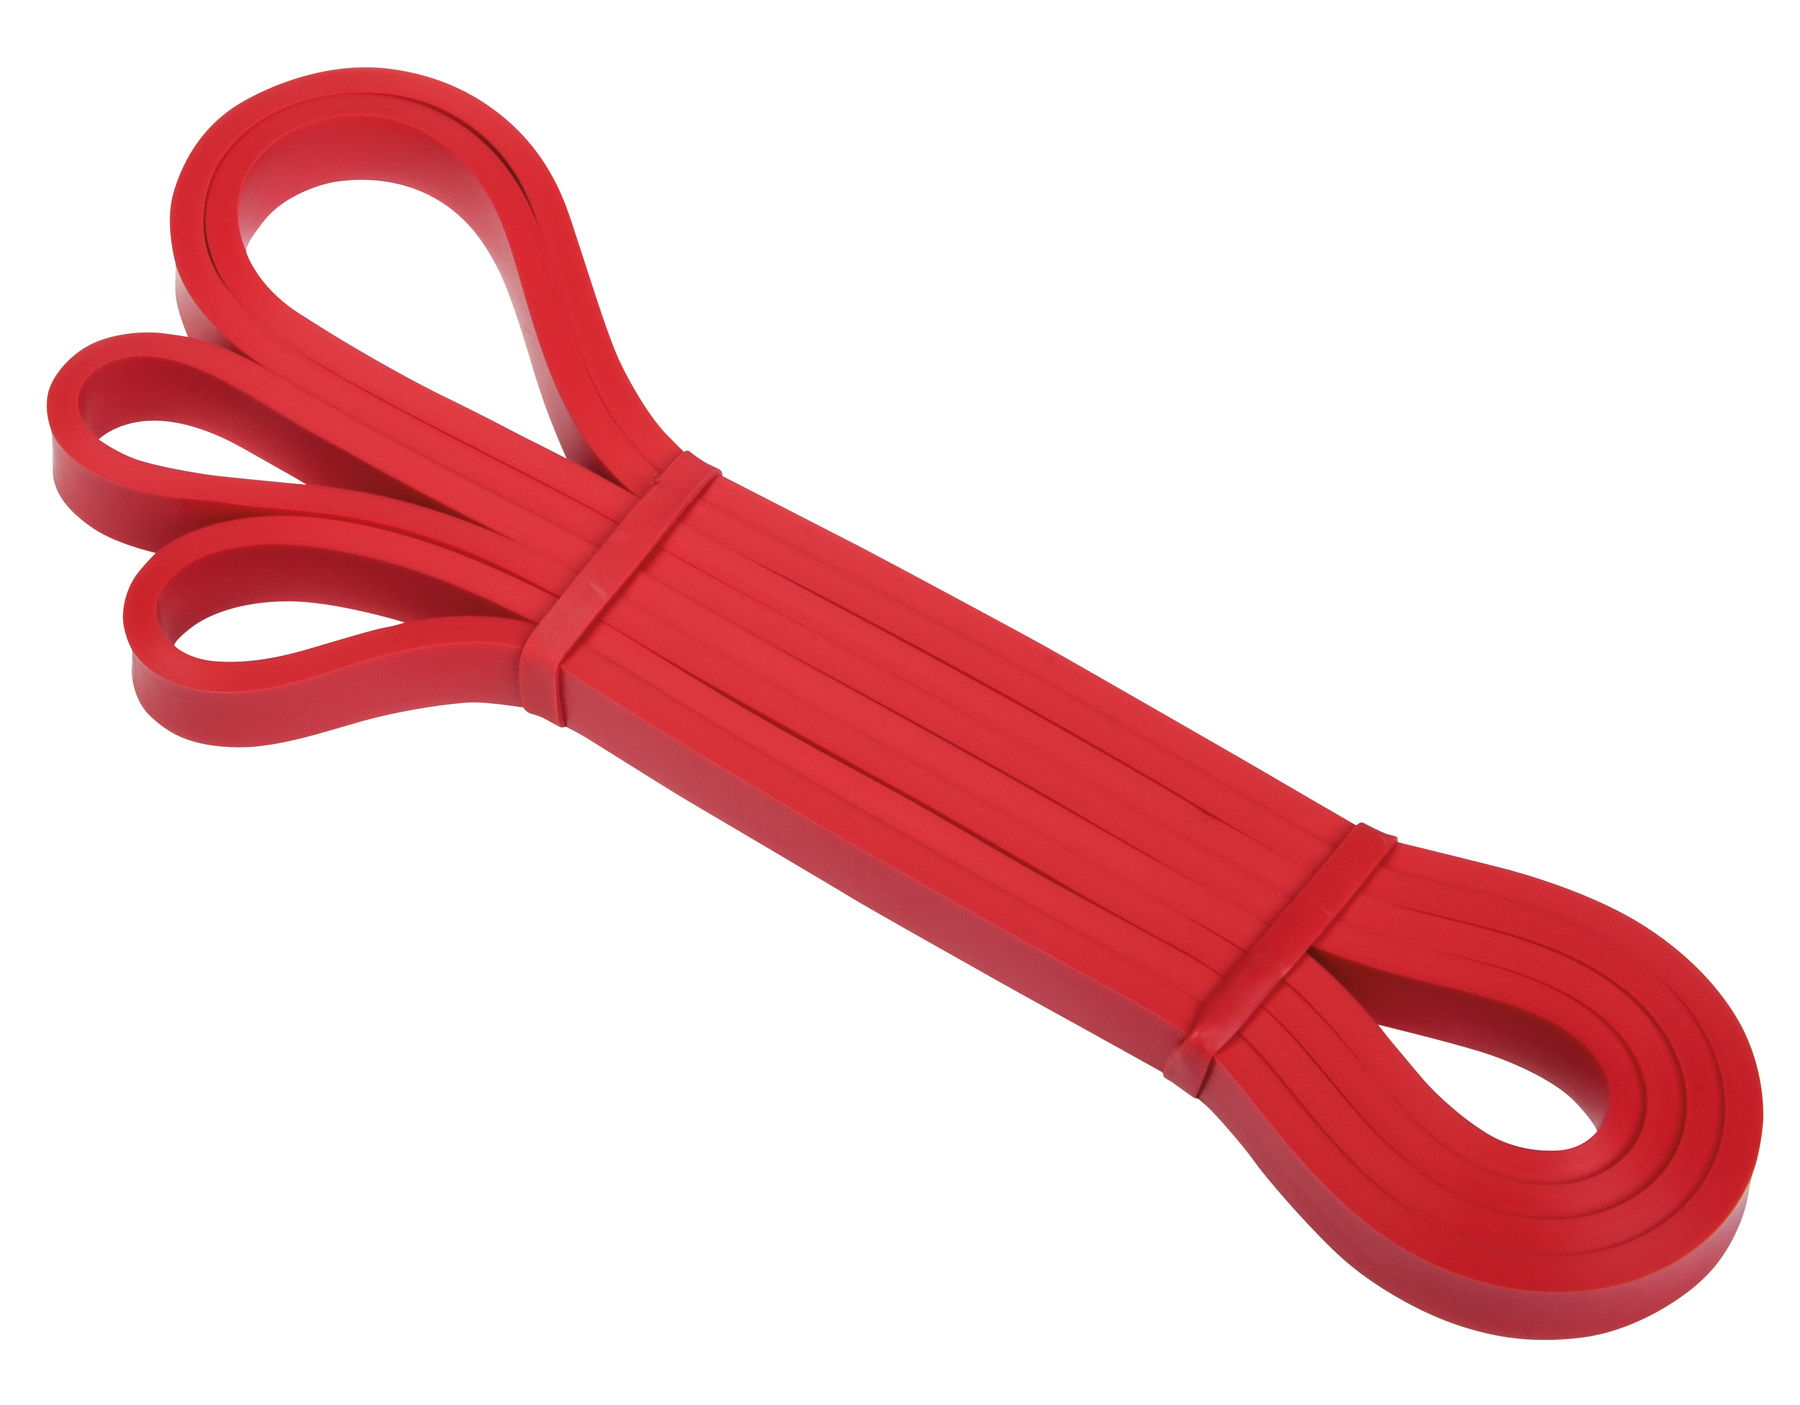 Exercise resistance band STRONG POWER, weight resistance approx. 6,8-15,9 kg - red